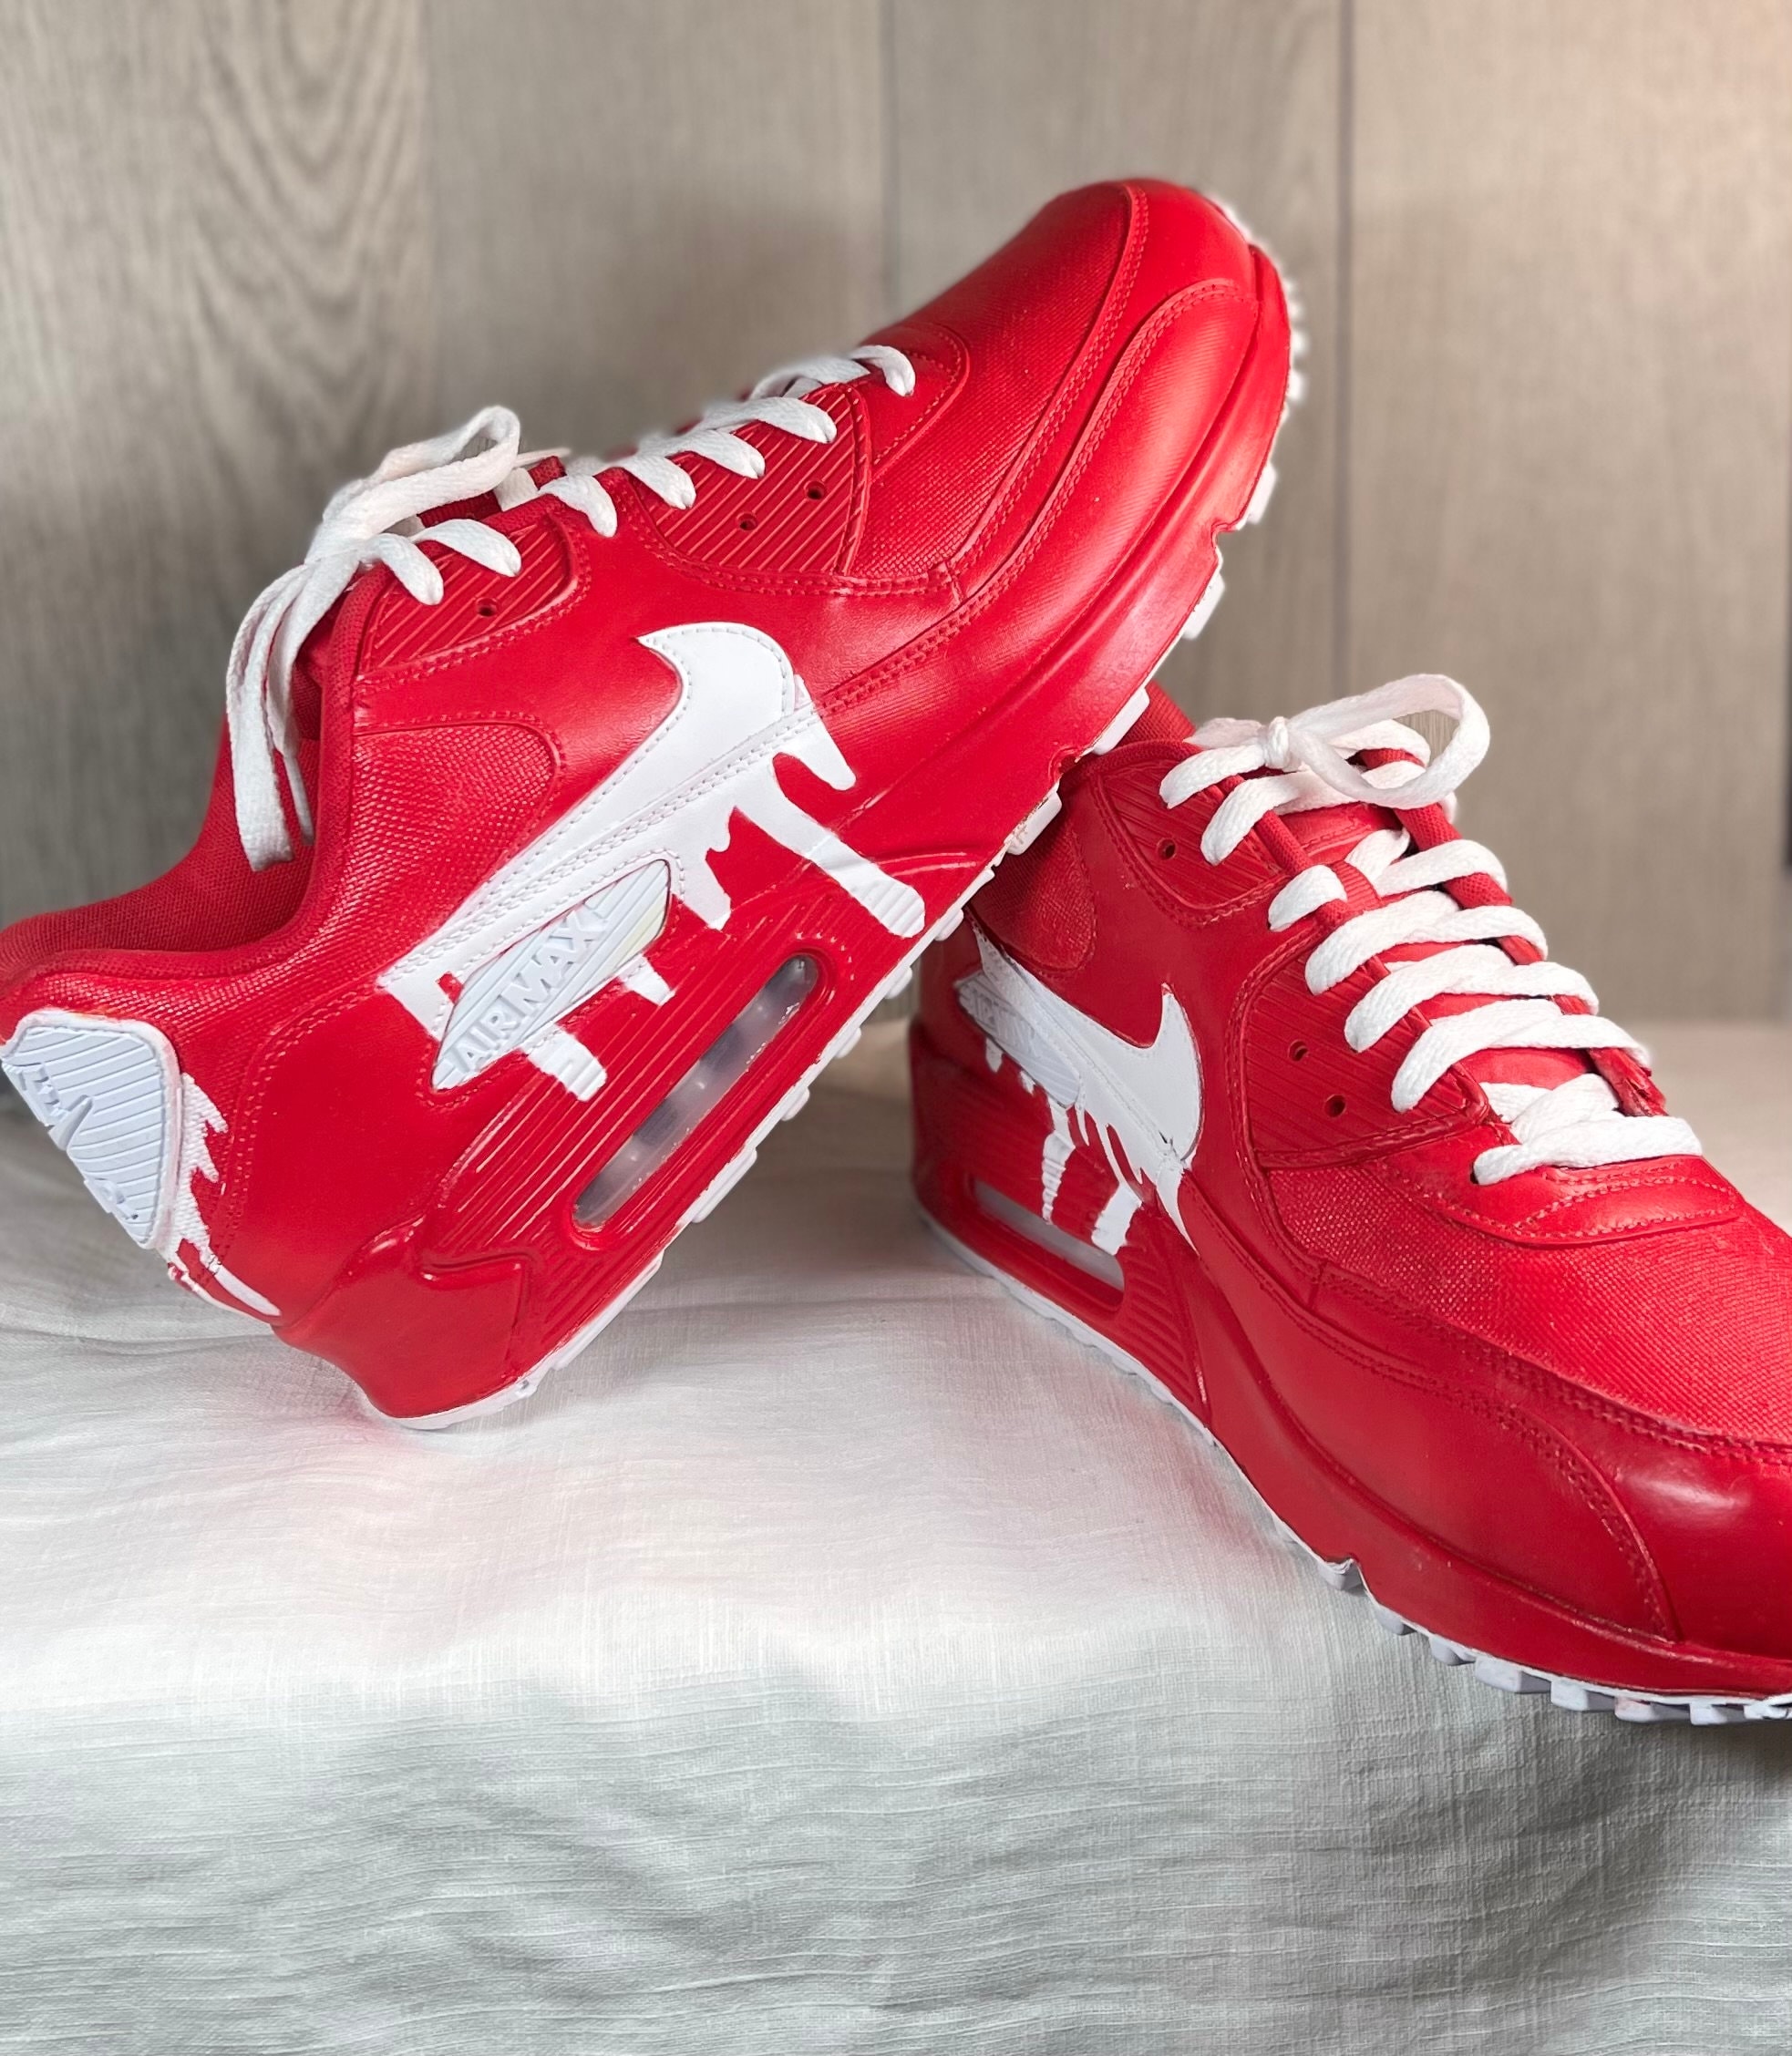 Air Max 90 Red Drips. 